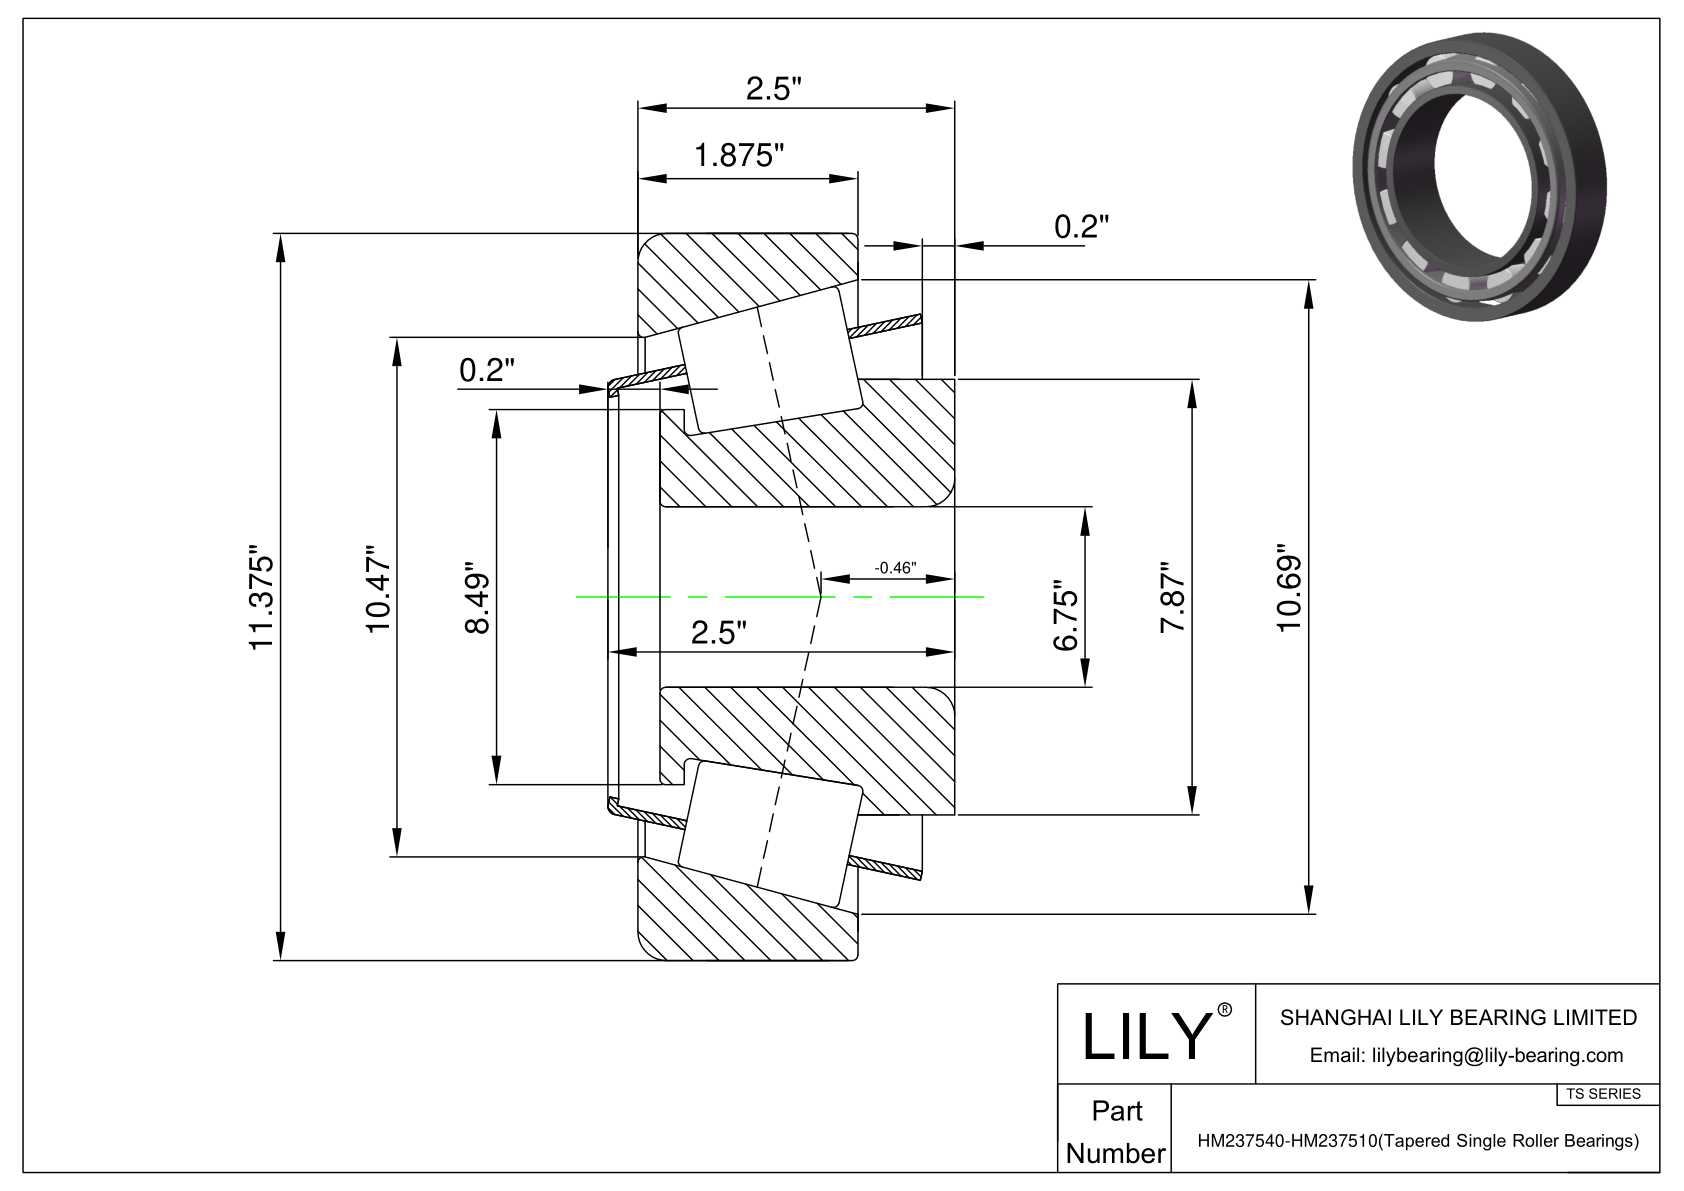 HM237540-HM237510 TS (Tapered Single Roller Bearings) (Imperial) cad drawing